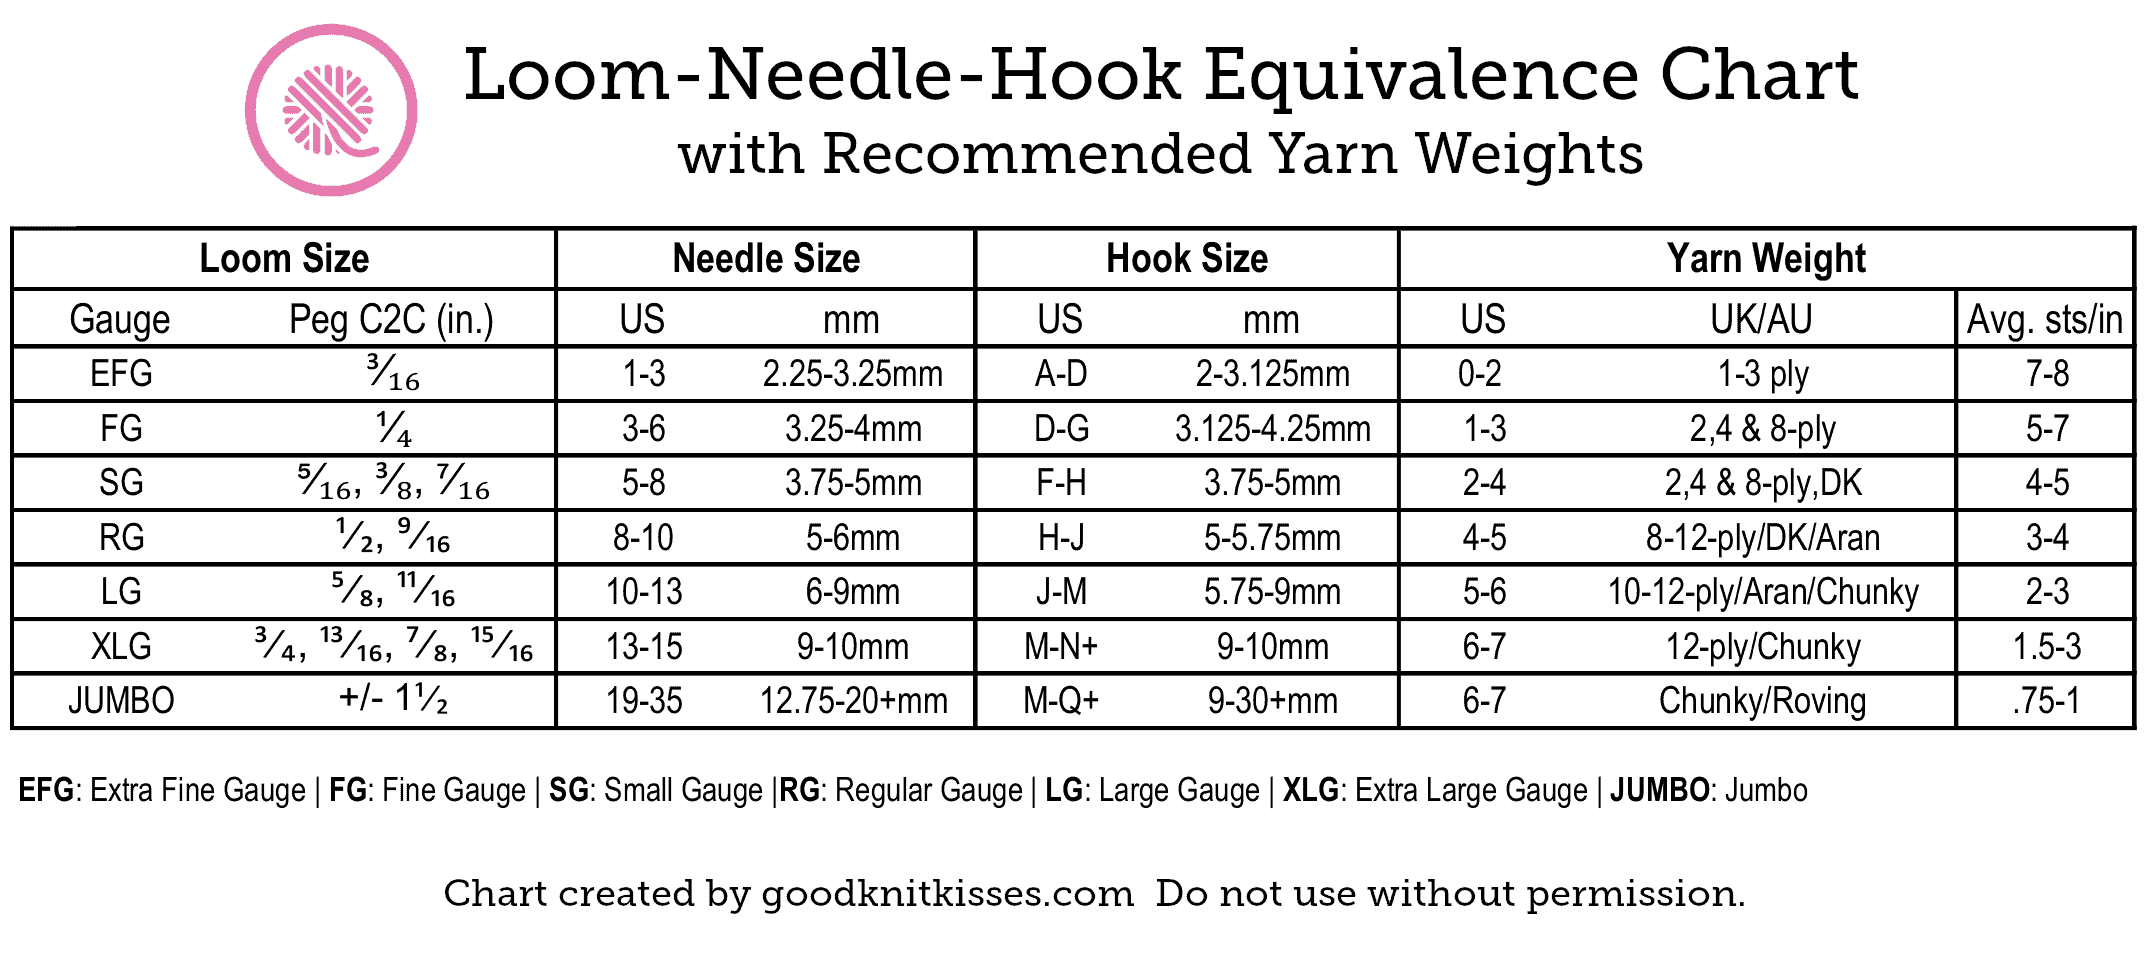 Yarn Weight Guide (+ Conversion Chart) - Handy Little Me